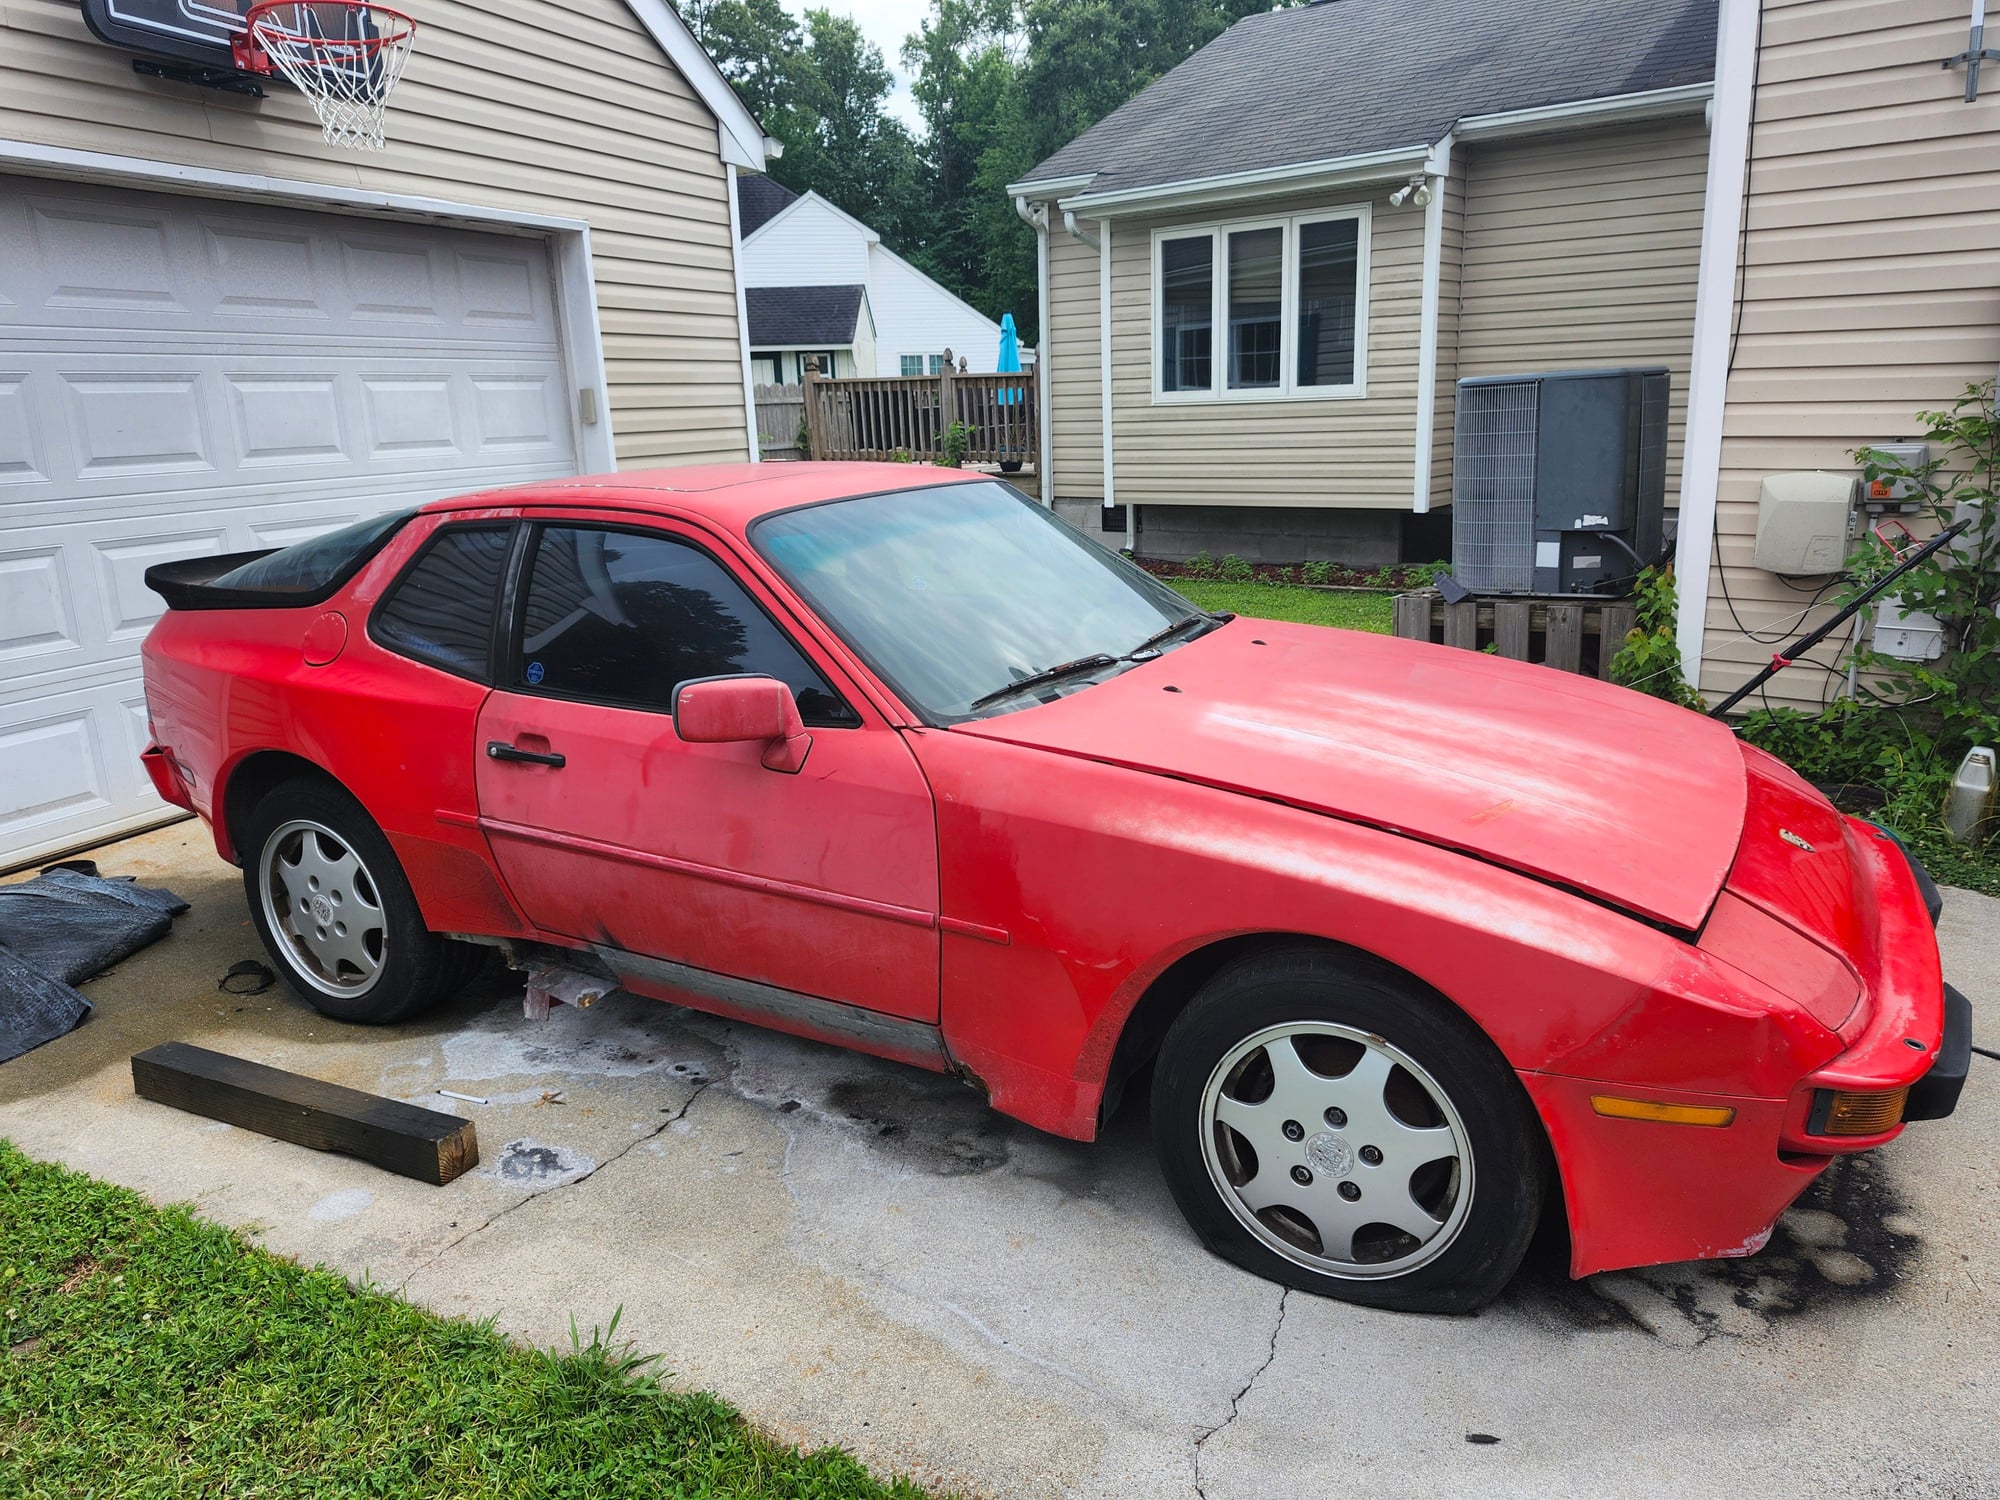 1988 Porsche 944 - 1988 944 NA - Used - VIN WP0AB0949JN47139 - 83,000 Miles - 4 cyl - 2WD - Manual - Coupe - Red - Chesapeake, VA 23322, United States